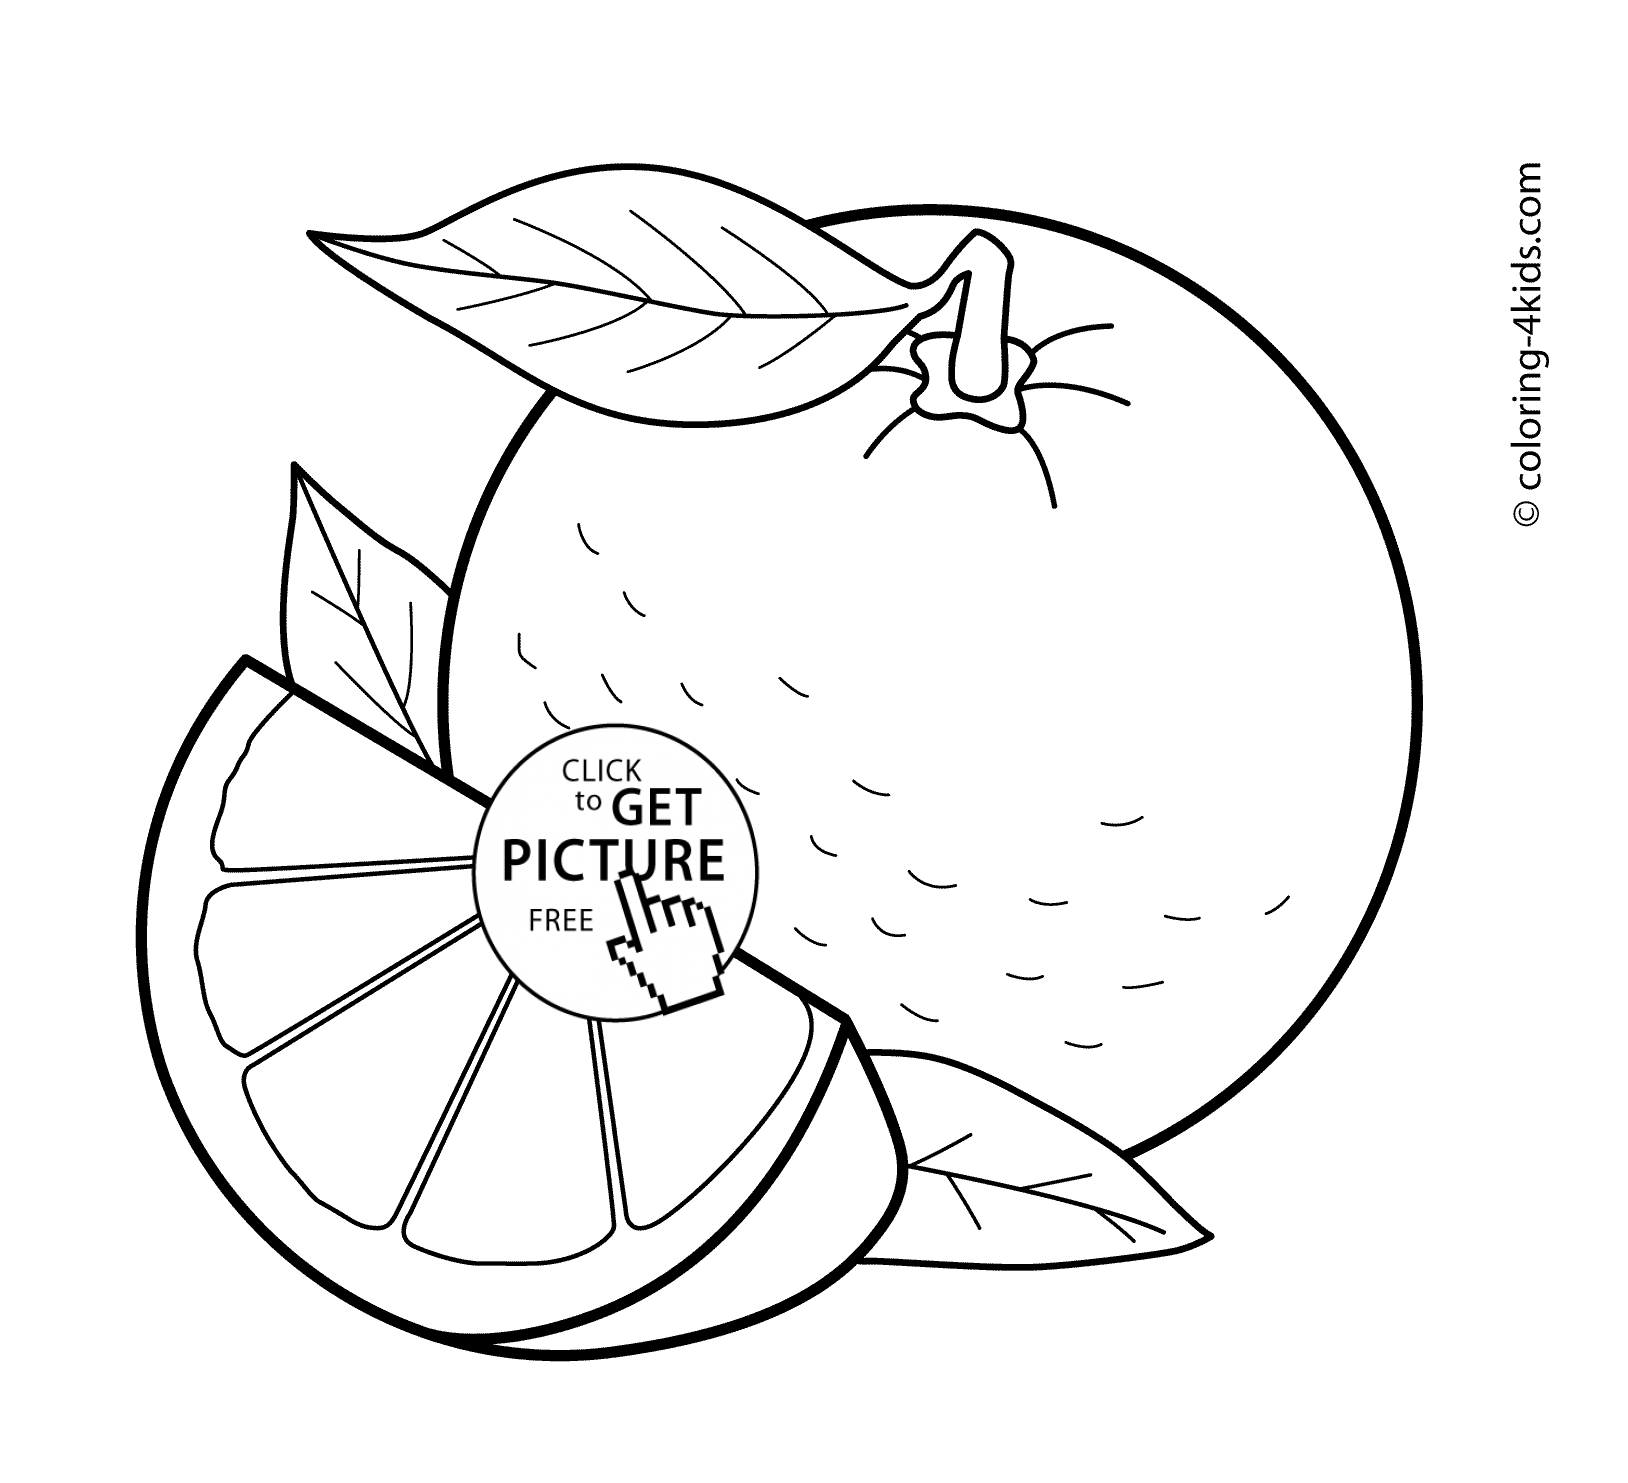 Color Orange Coloring Pages Orange Fruits Coloring Pages For Kids Printable Free Coloing